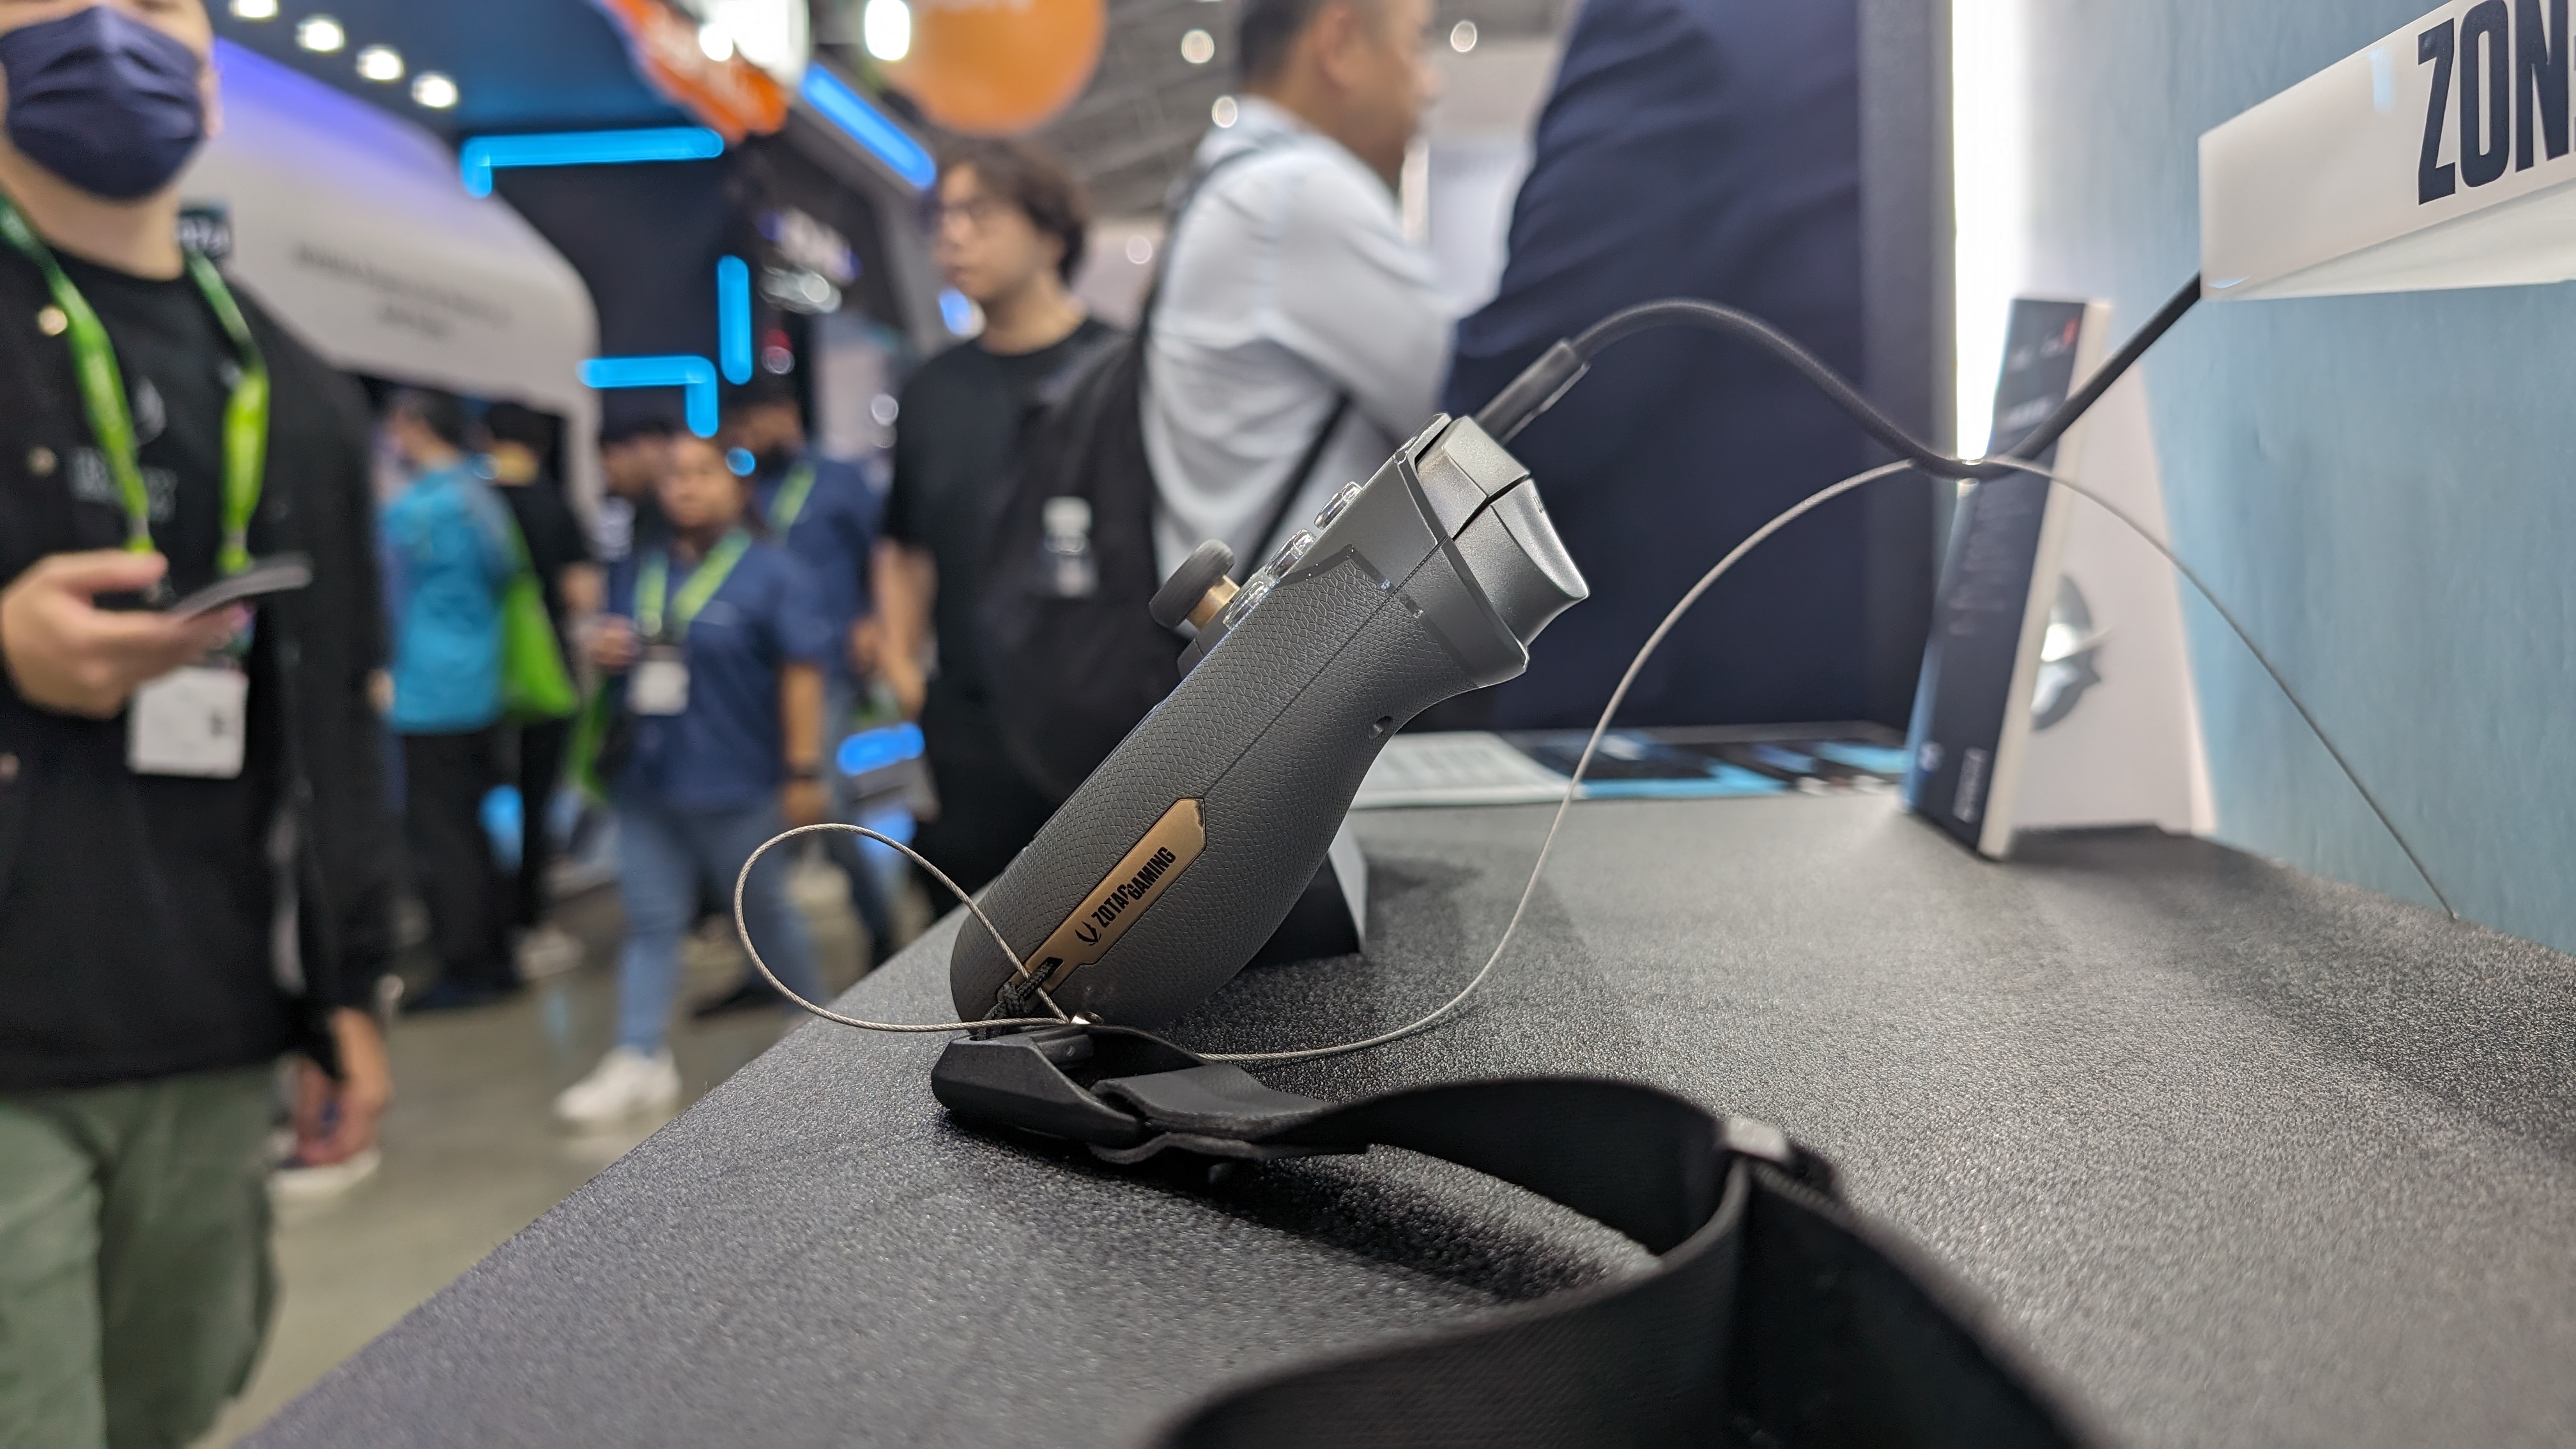 The Zotac Zone handheld gaming PC on the Zotac stand at Computex 2024.